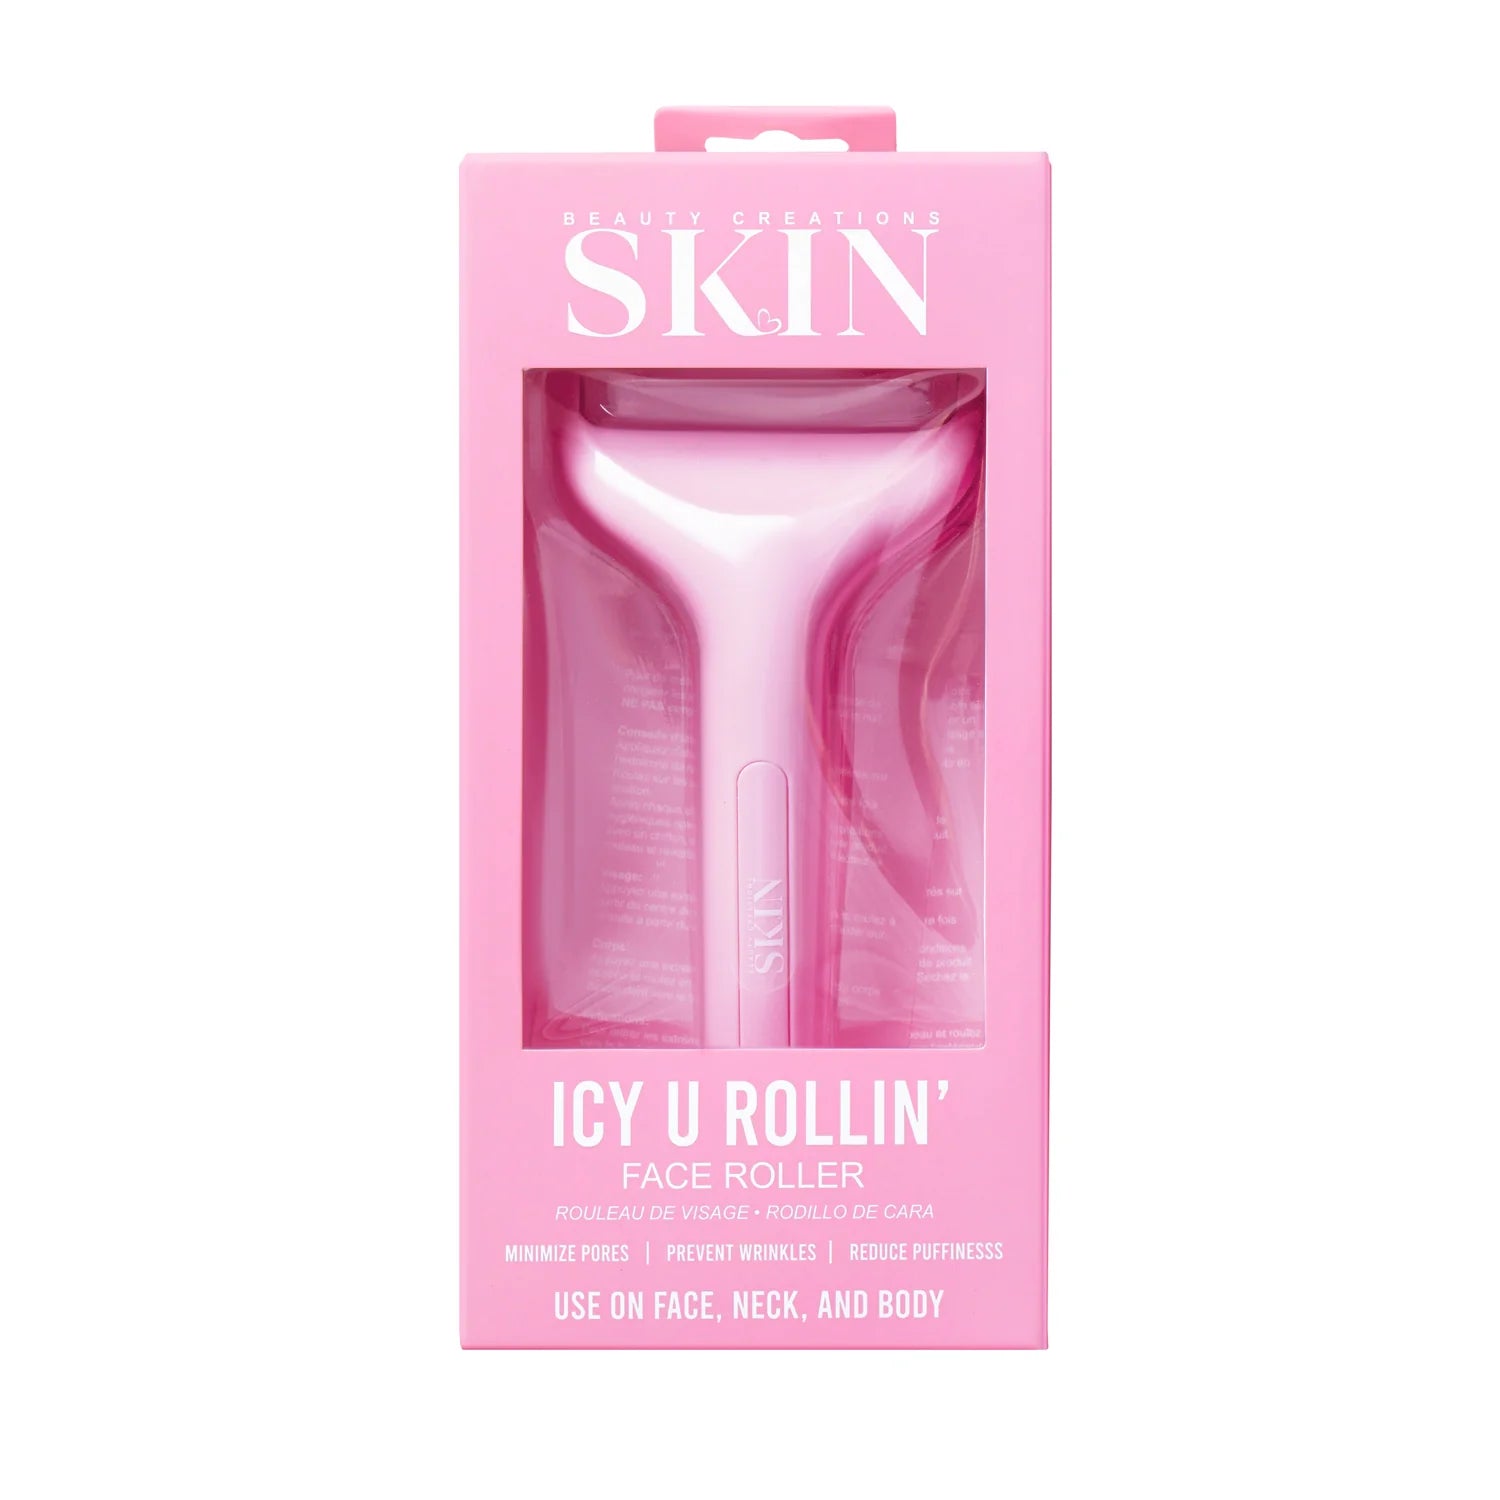 Beauty Creations - Icy U Rollin' Face Roller